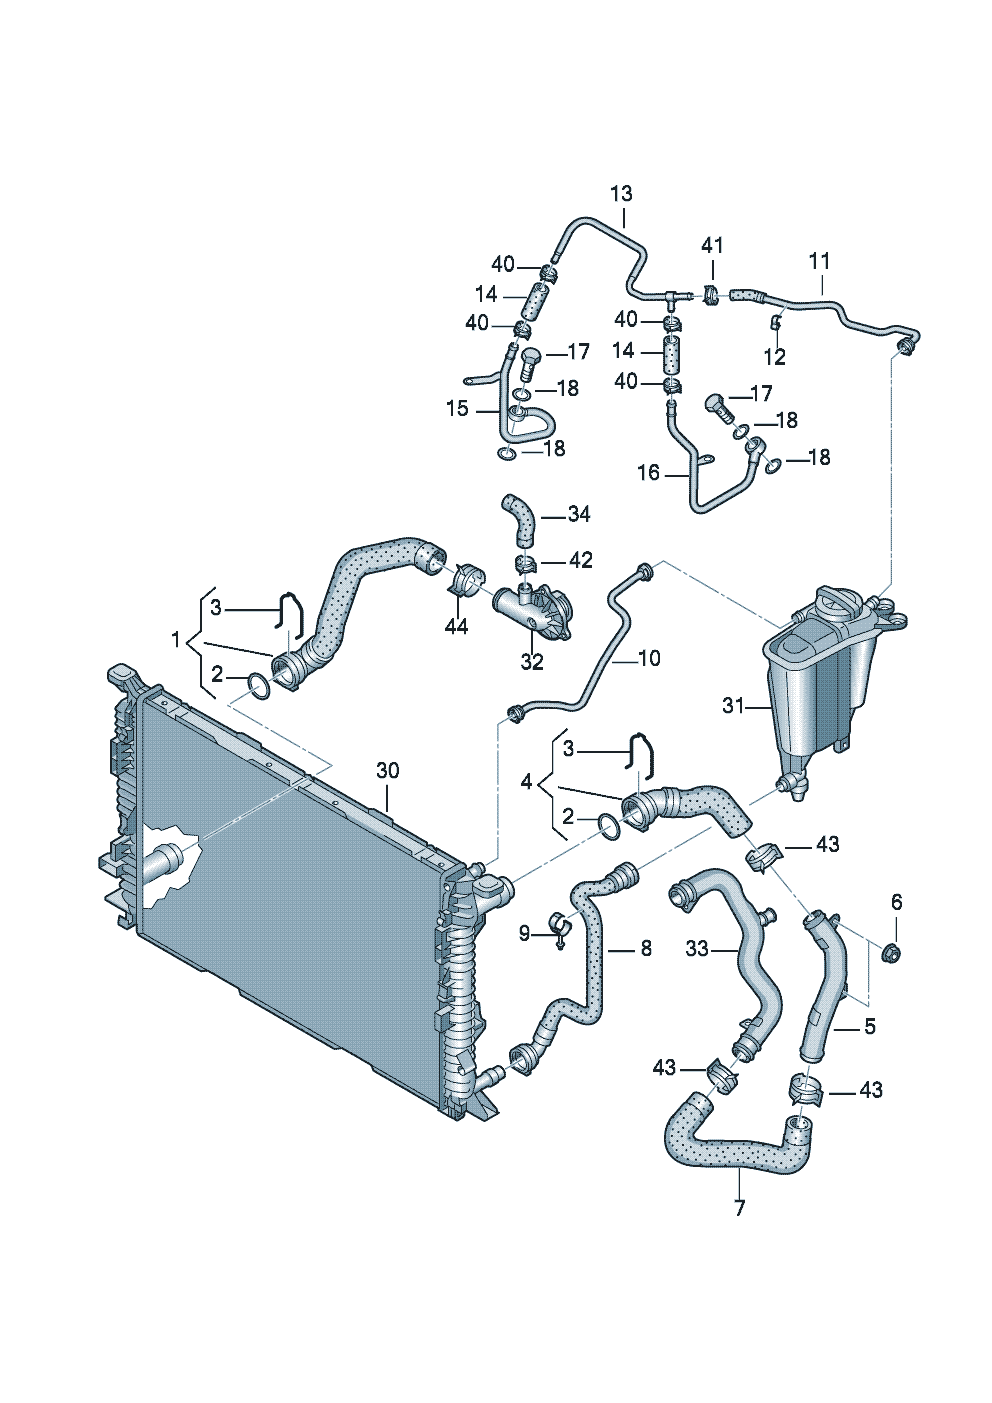 Coolant cooling system feed2.7/3.0 ltr. - Audi A4/S4/Avant - a4q